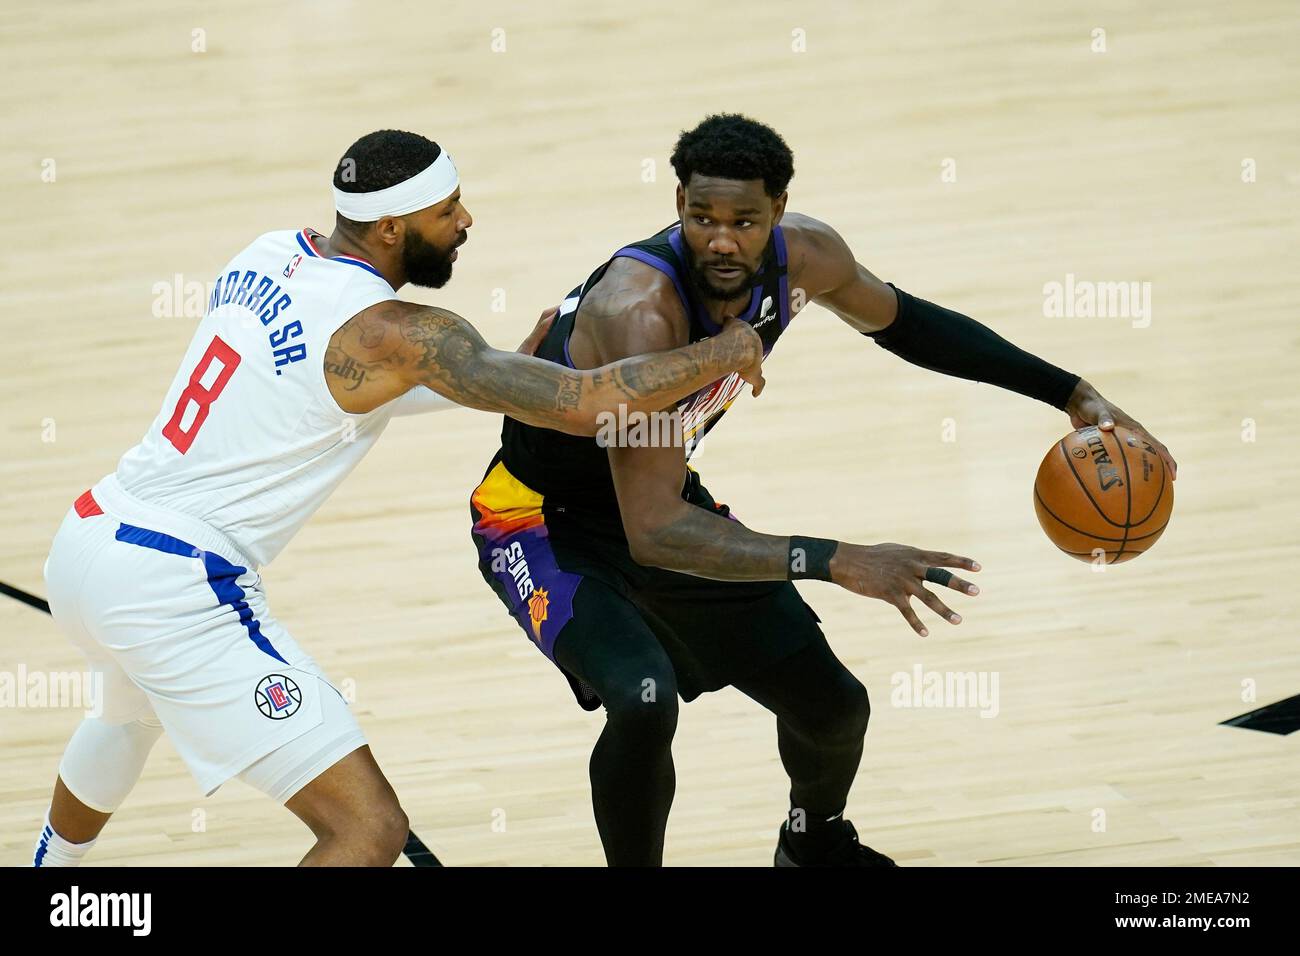 Los Angeles Clippers forward Marcus Morris Sr. (8) dribbles during